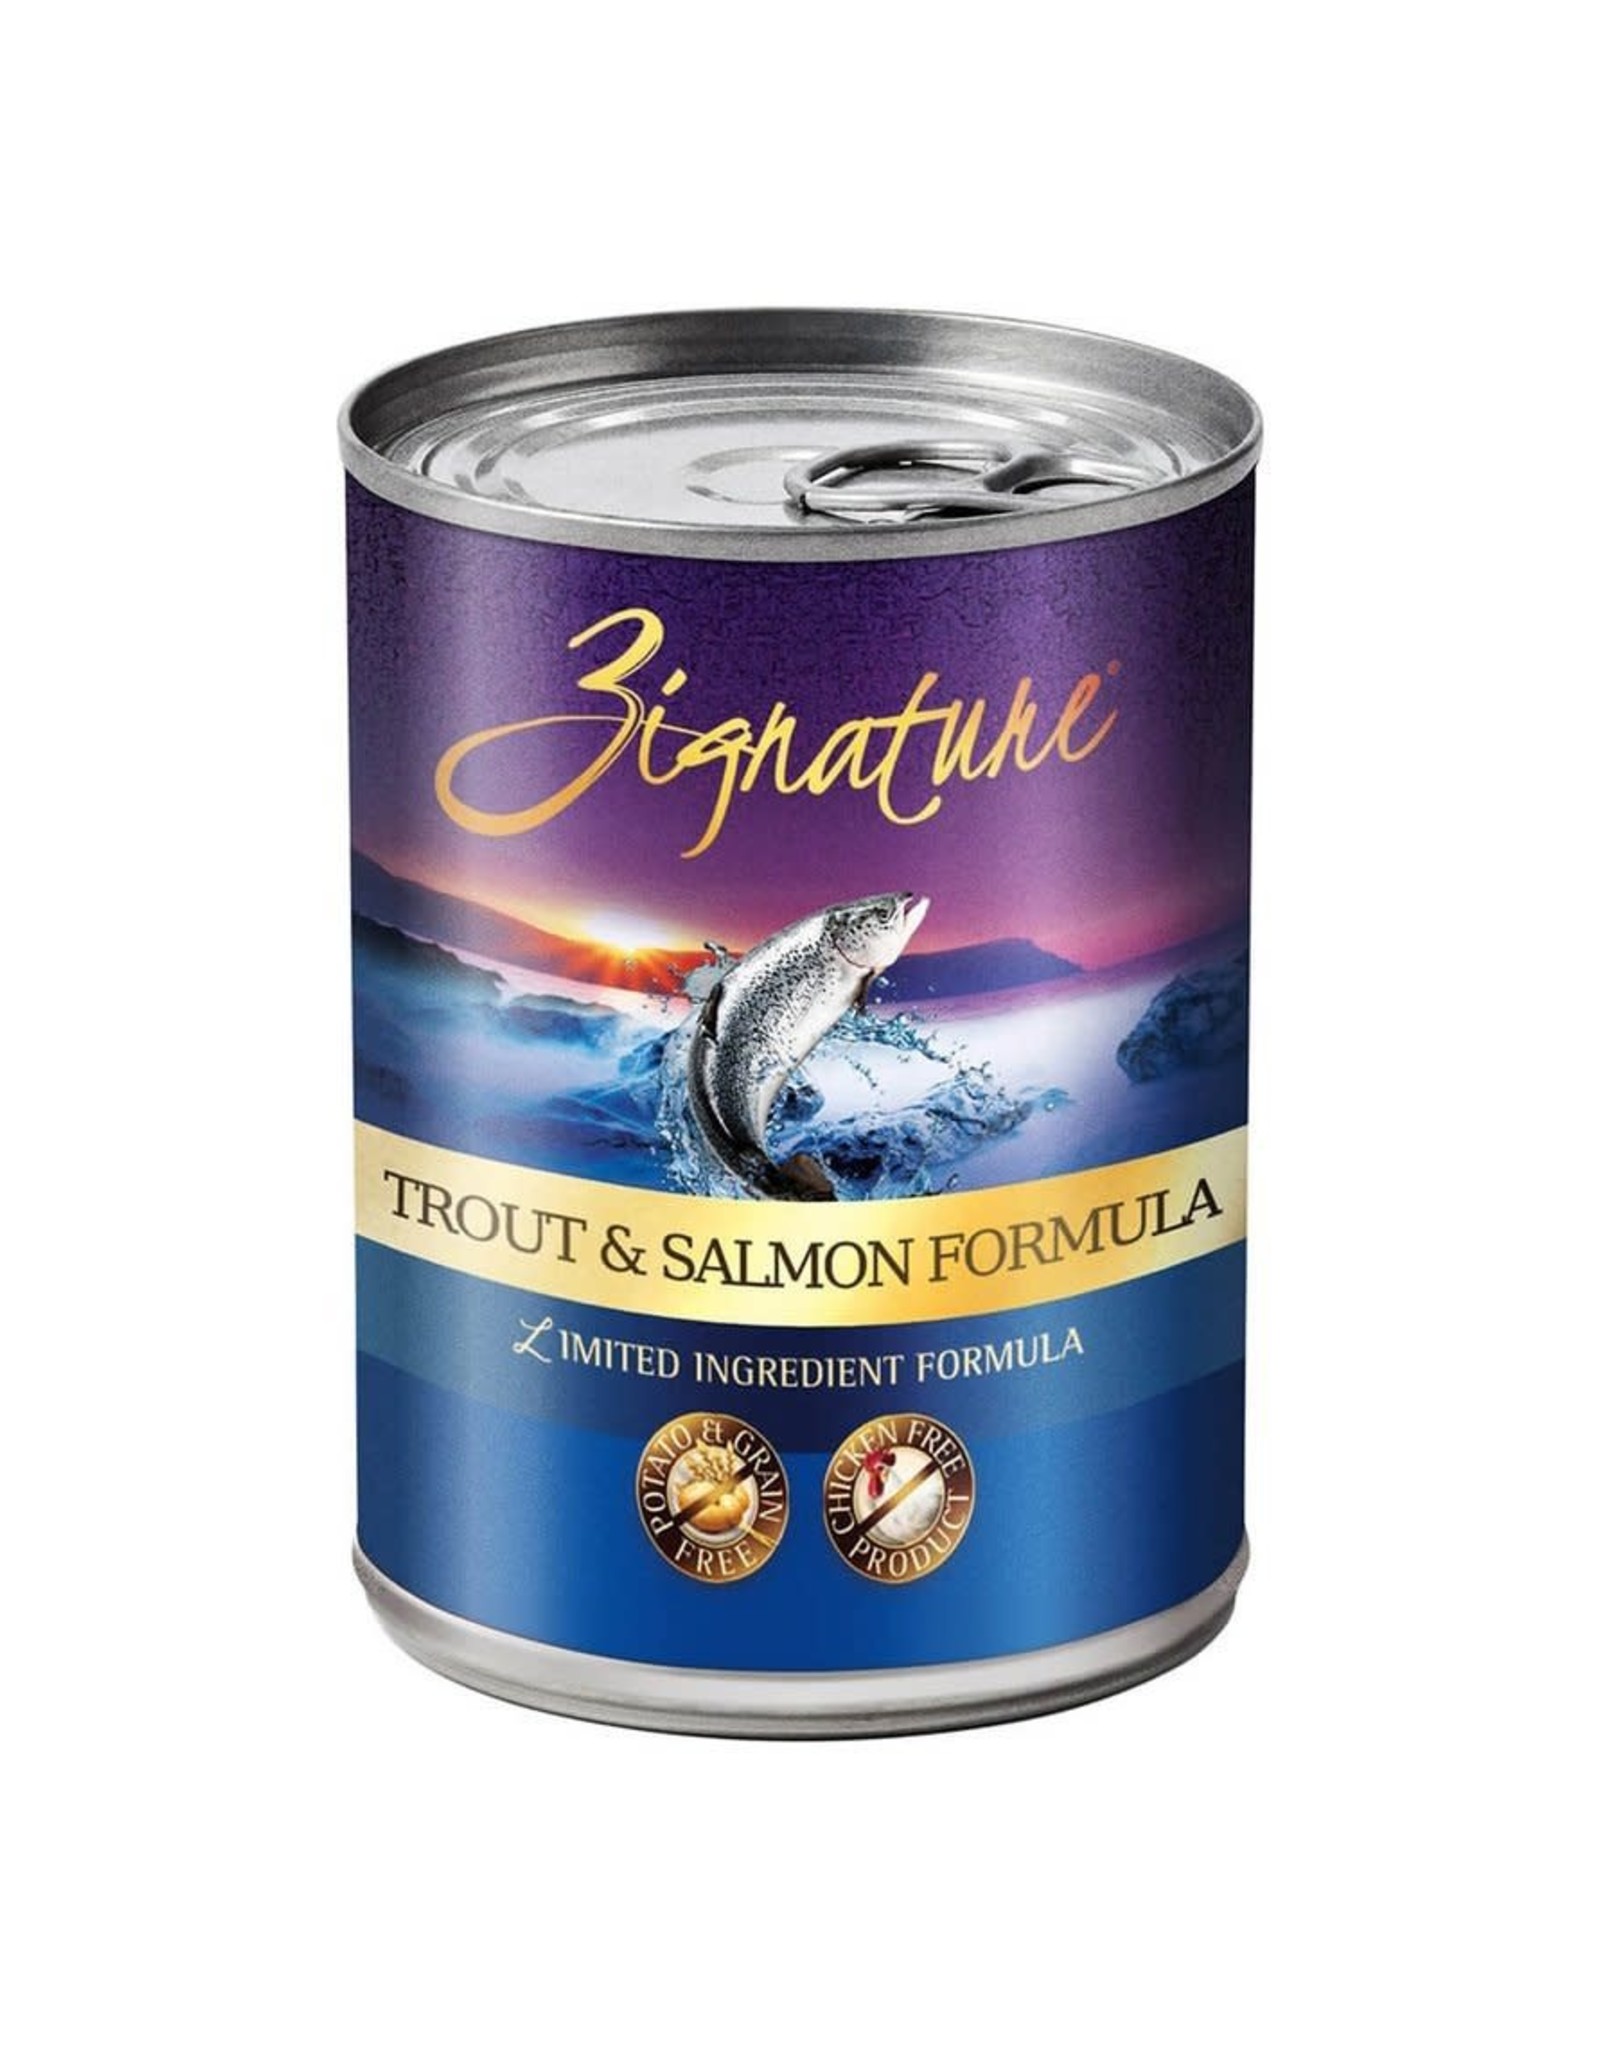 PETS GLOBAL Zignature Limited Ingredient Grain Free Canned Dog Food - Trout & Salmon 13 oz